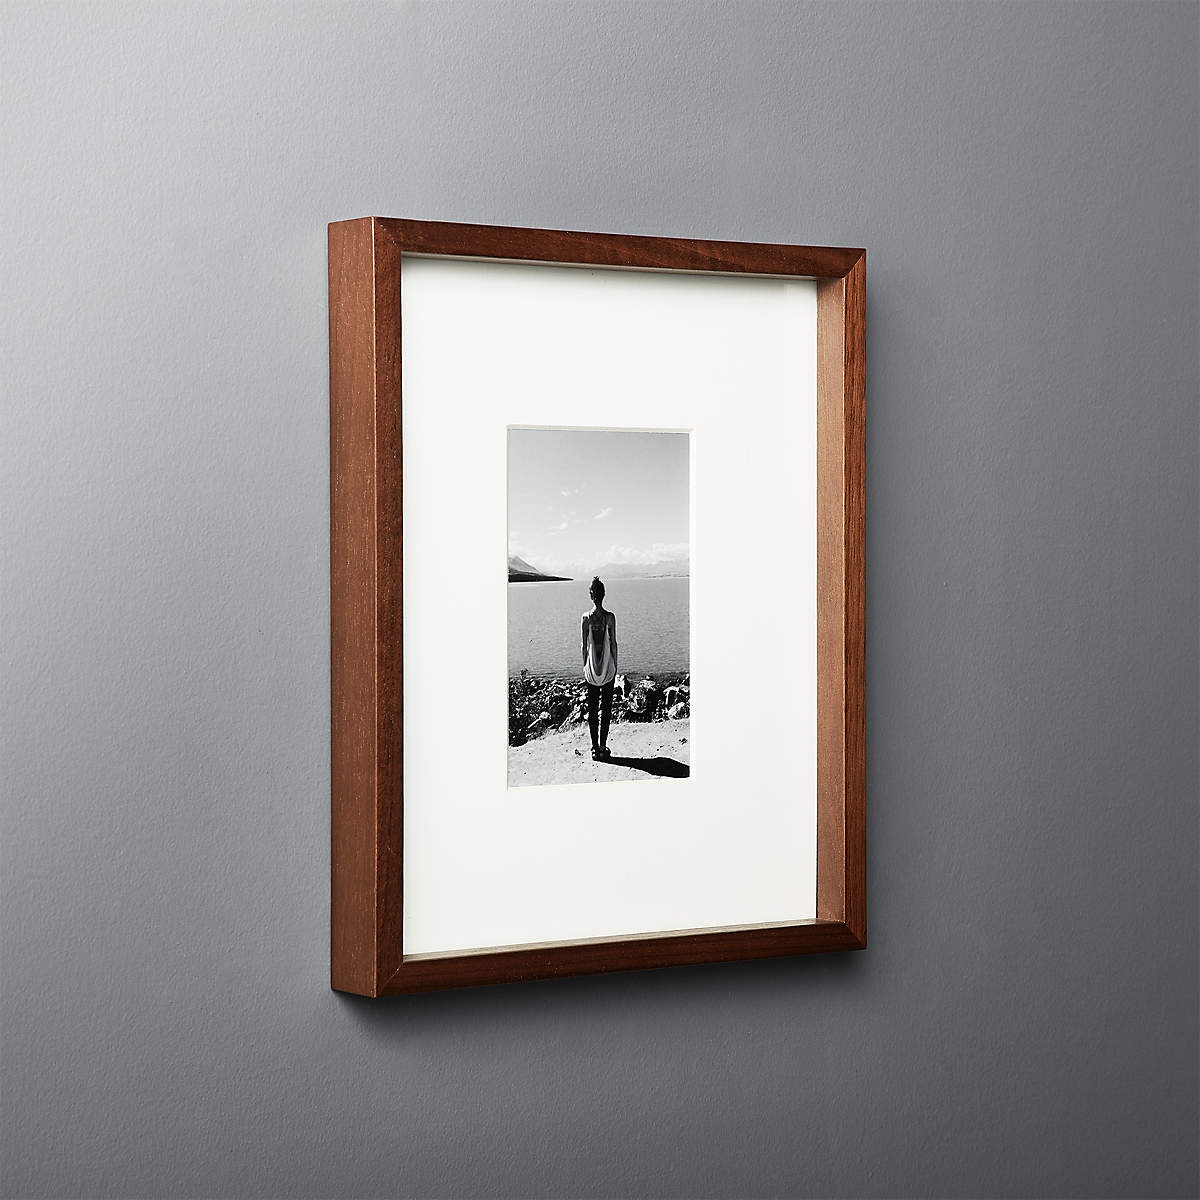 Gallery Walnut Picture Frame with White Mat 4" x 6" - Image 0